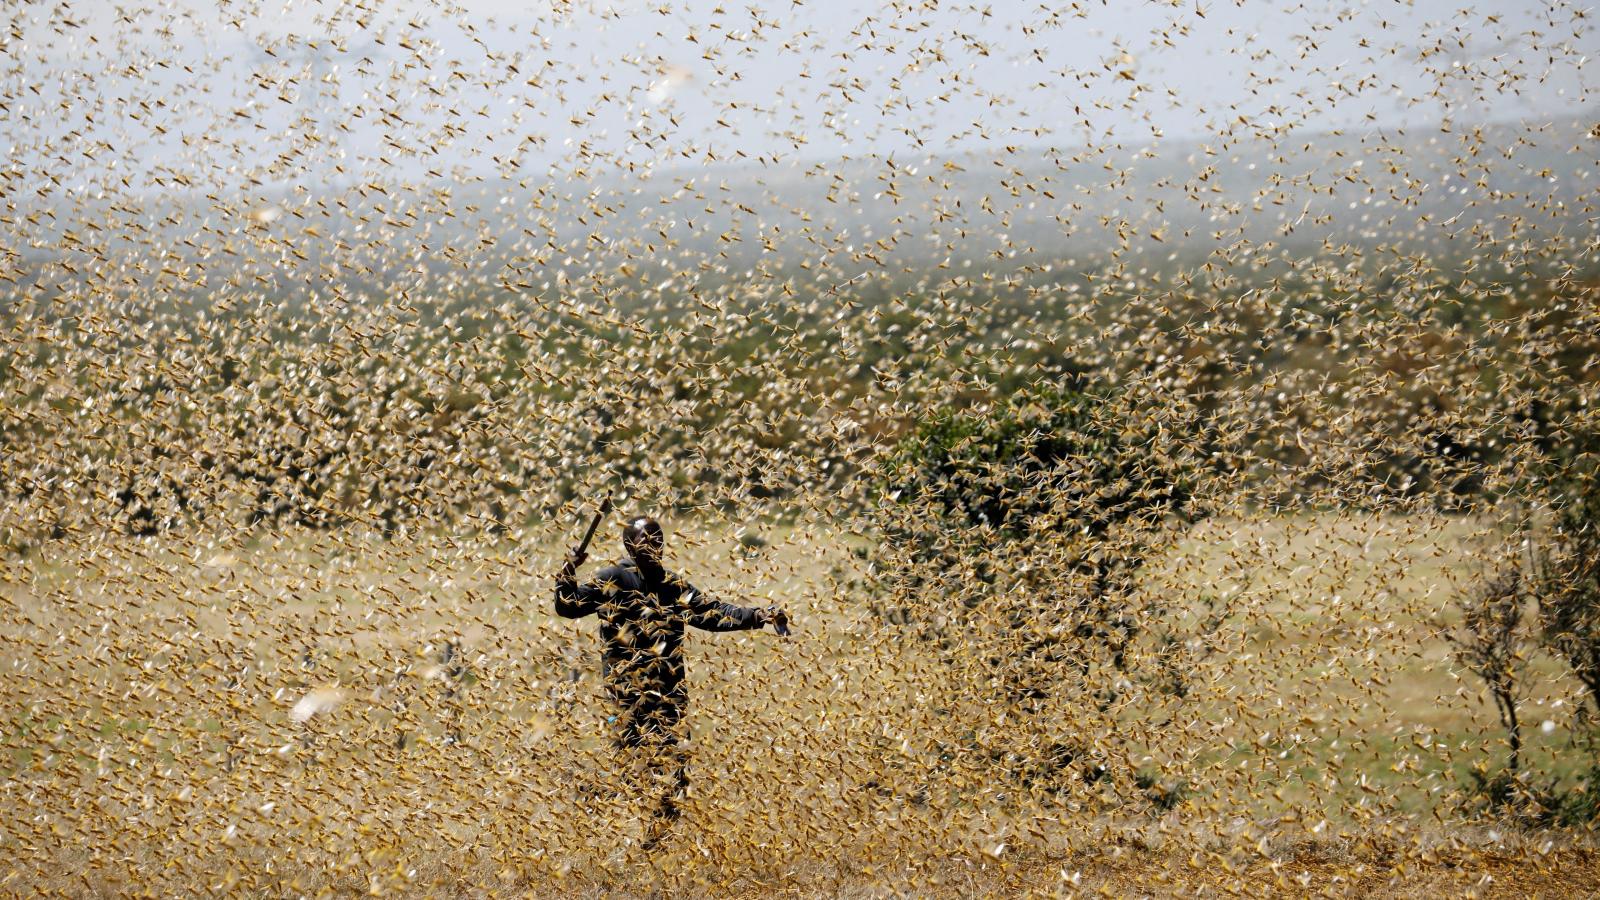 Locusts to hit East Africa again -FAO warns